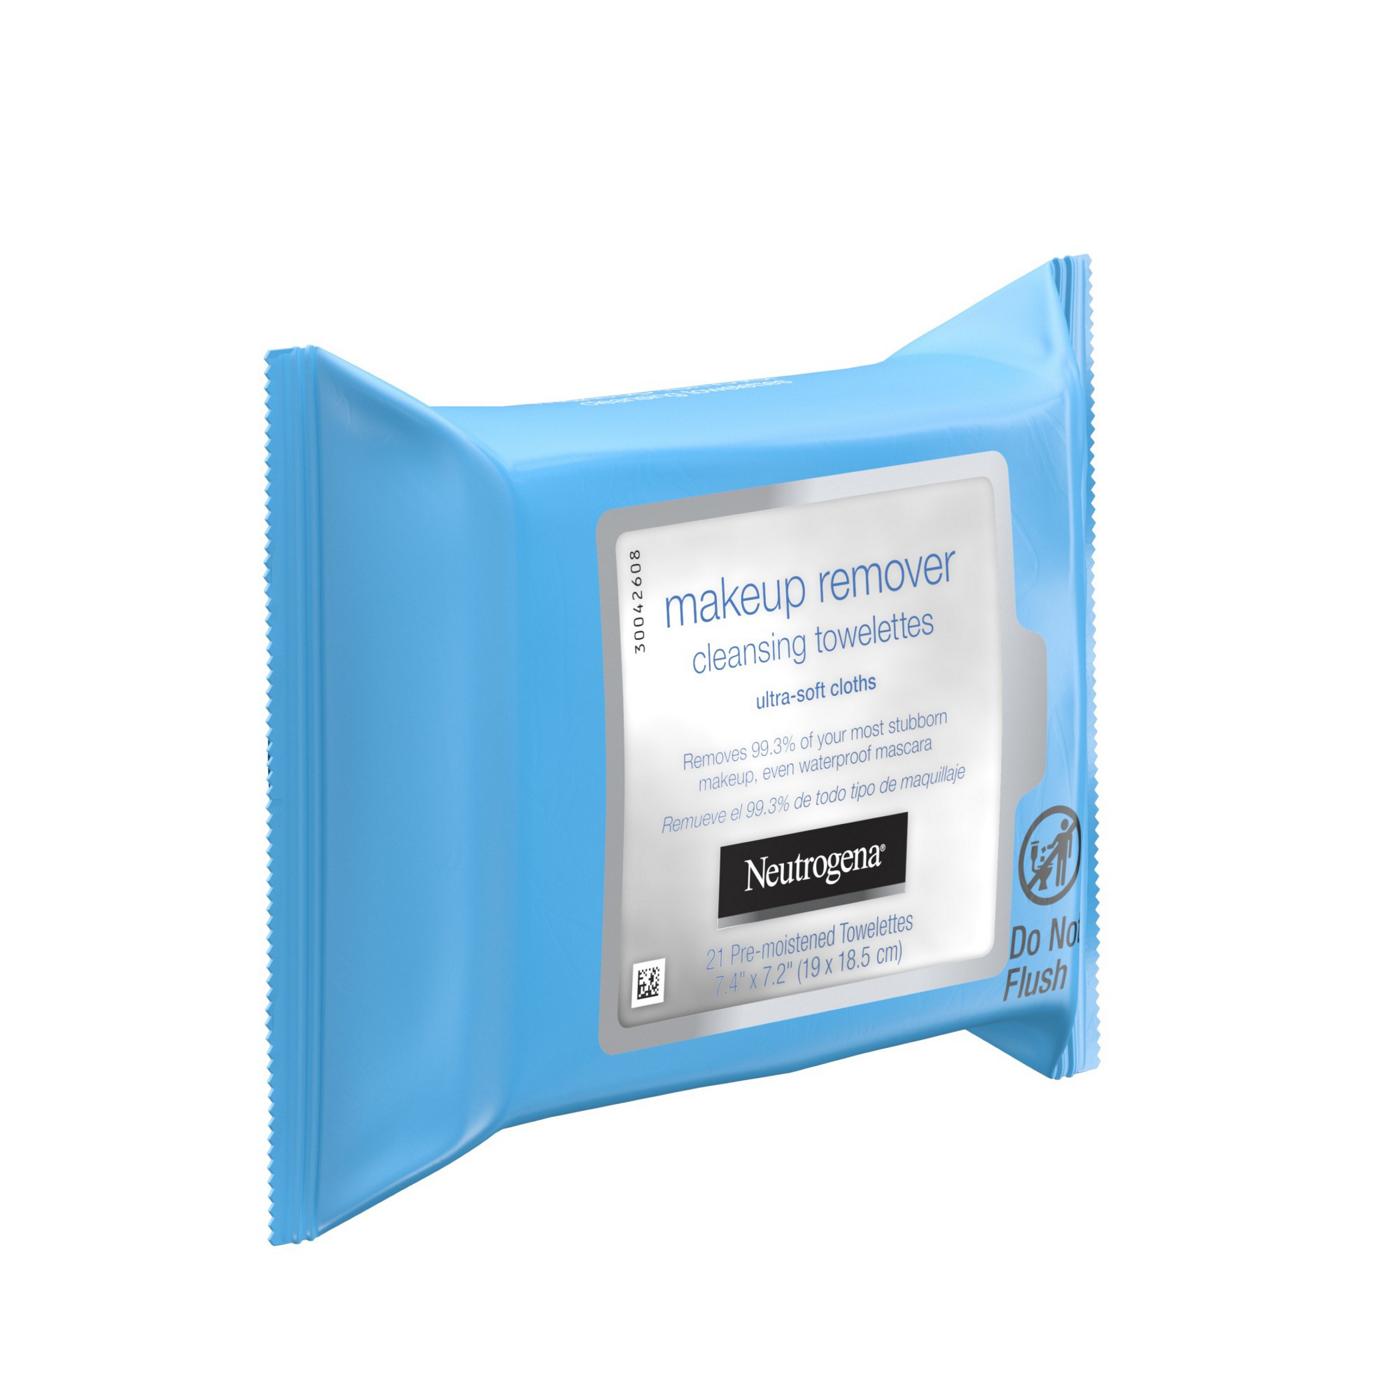 Neutrogena Makeup Remover Cleansing Towelettes; image 5 of 5